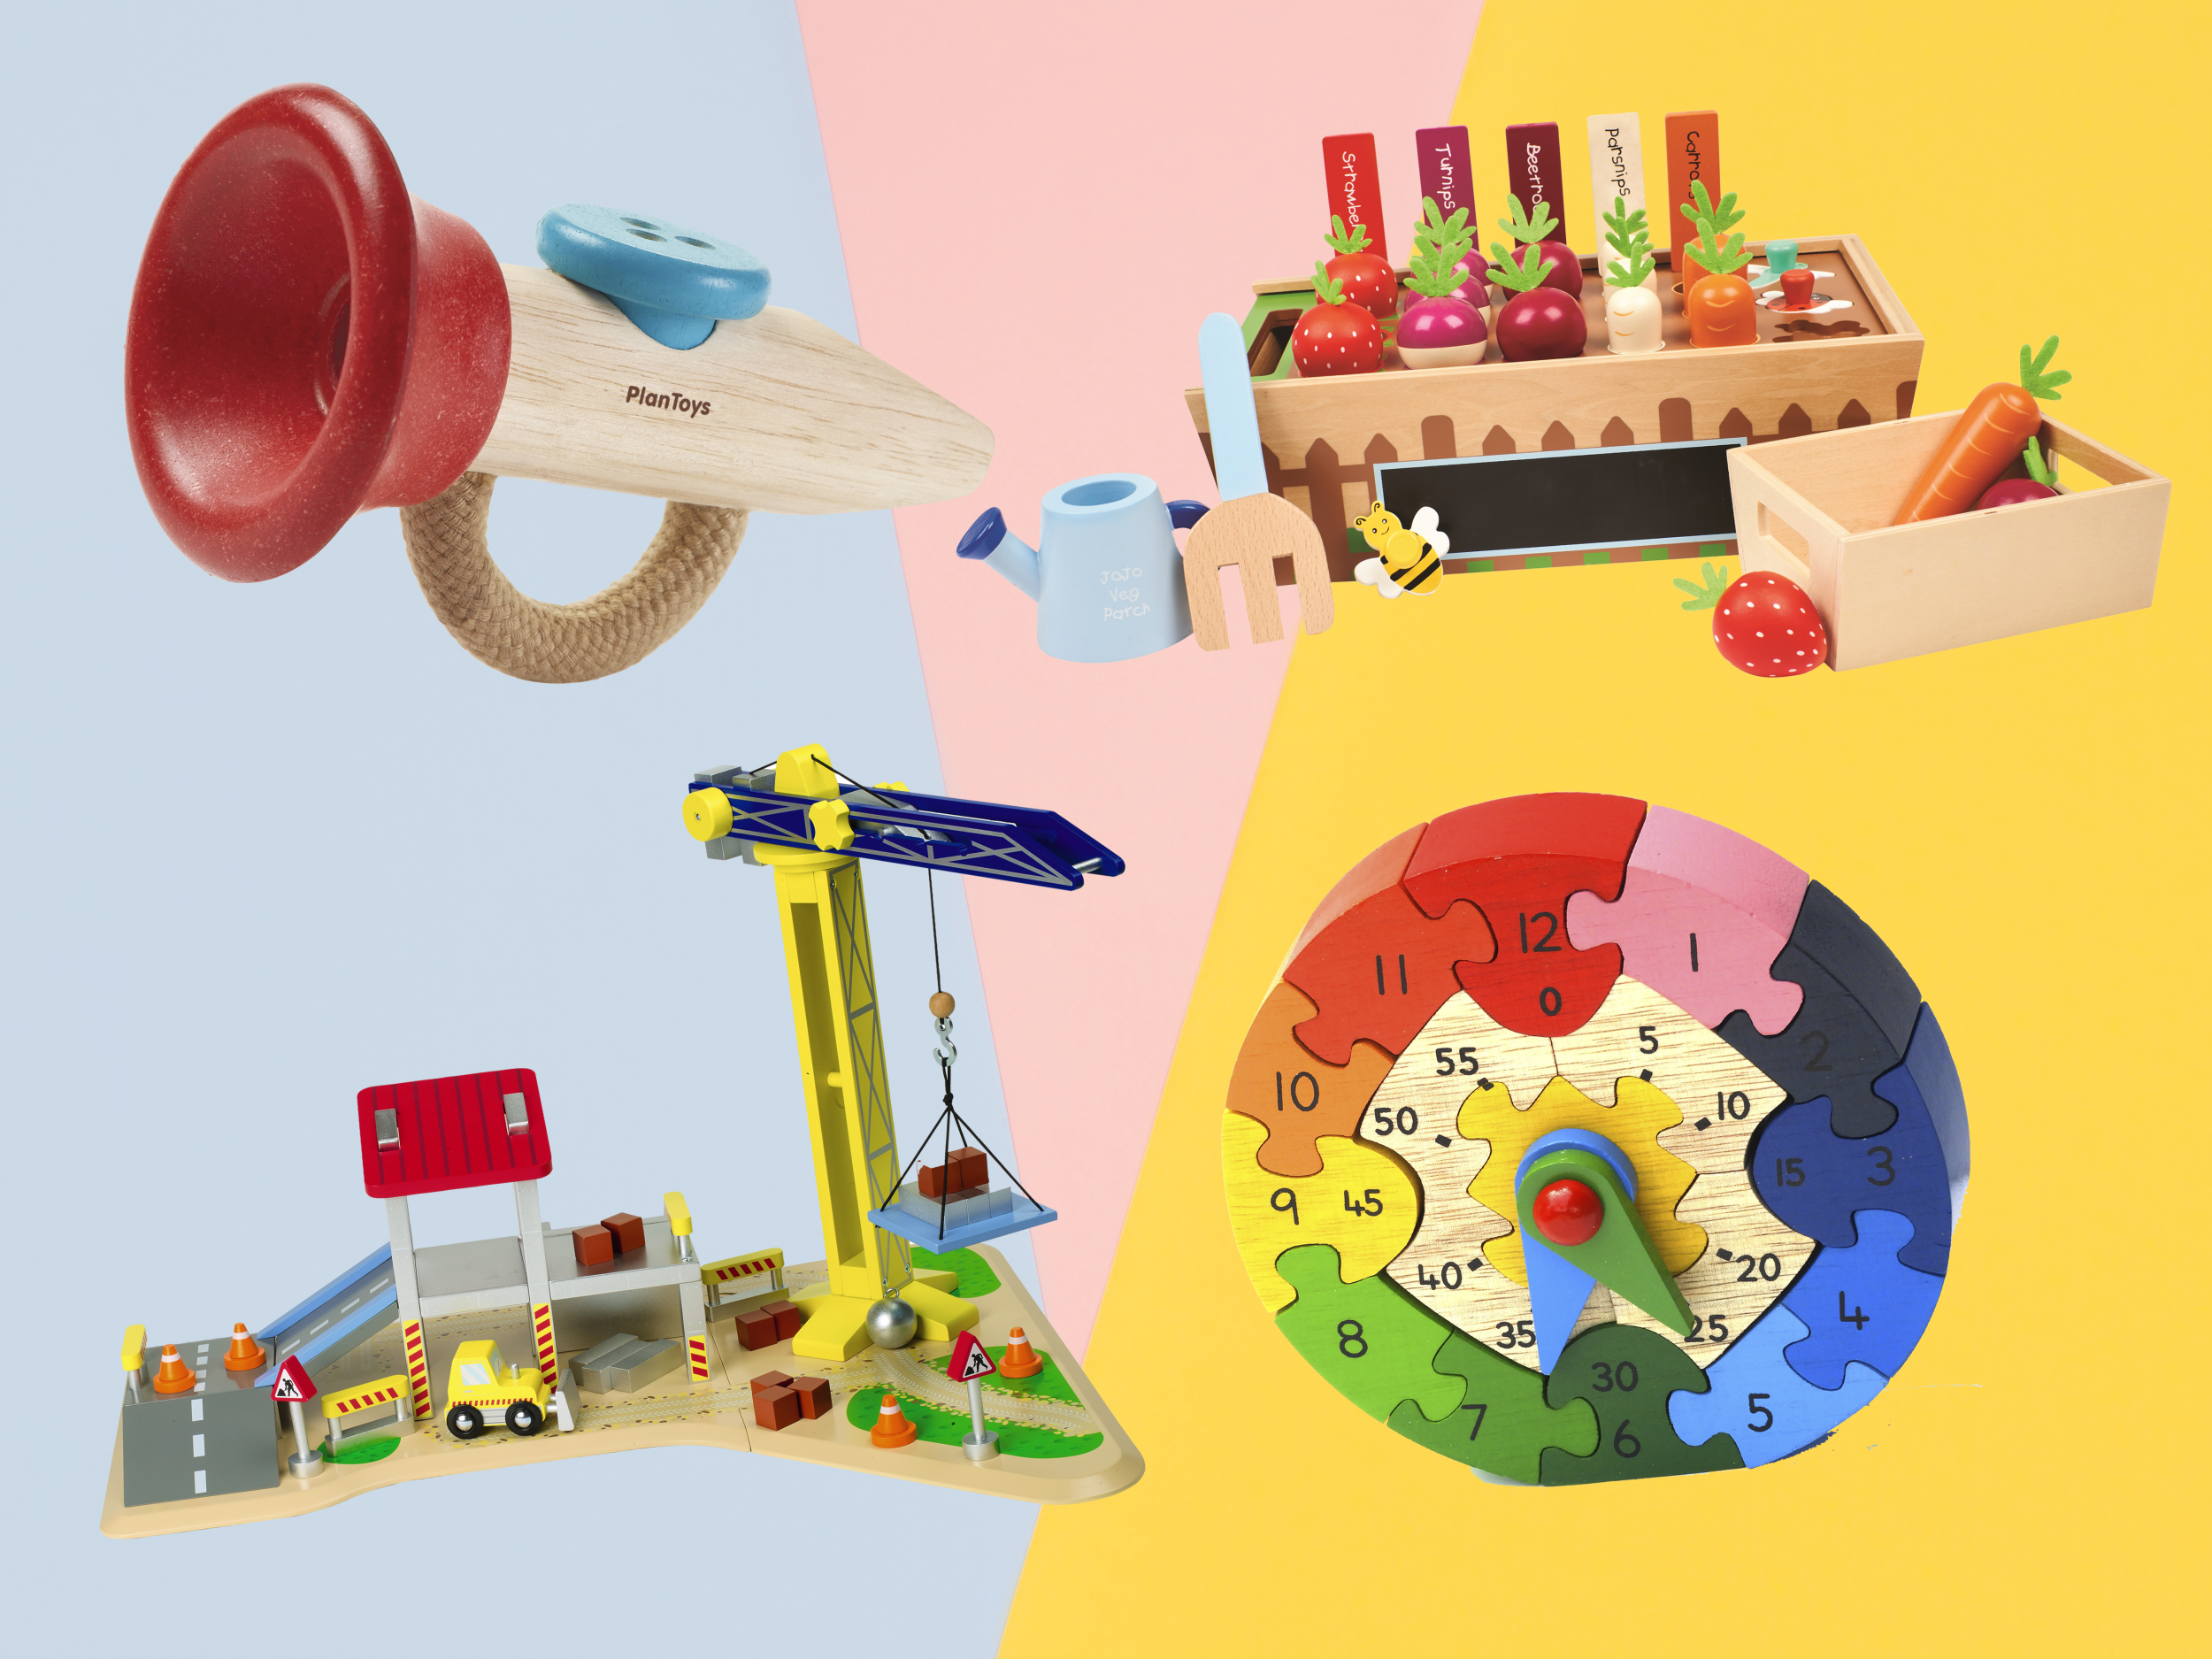 imagination toys for toddlers